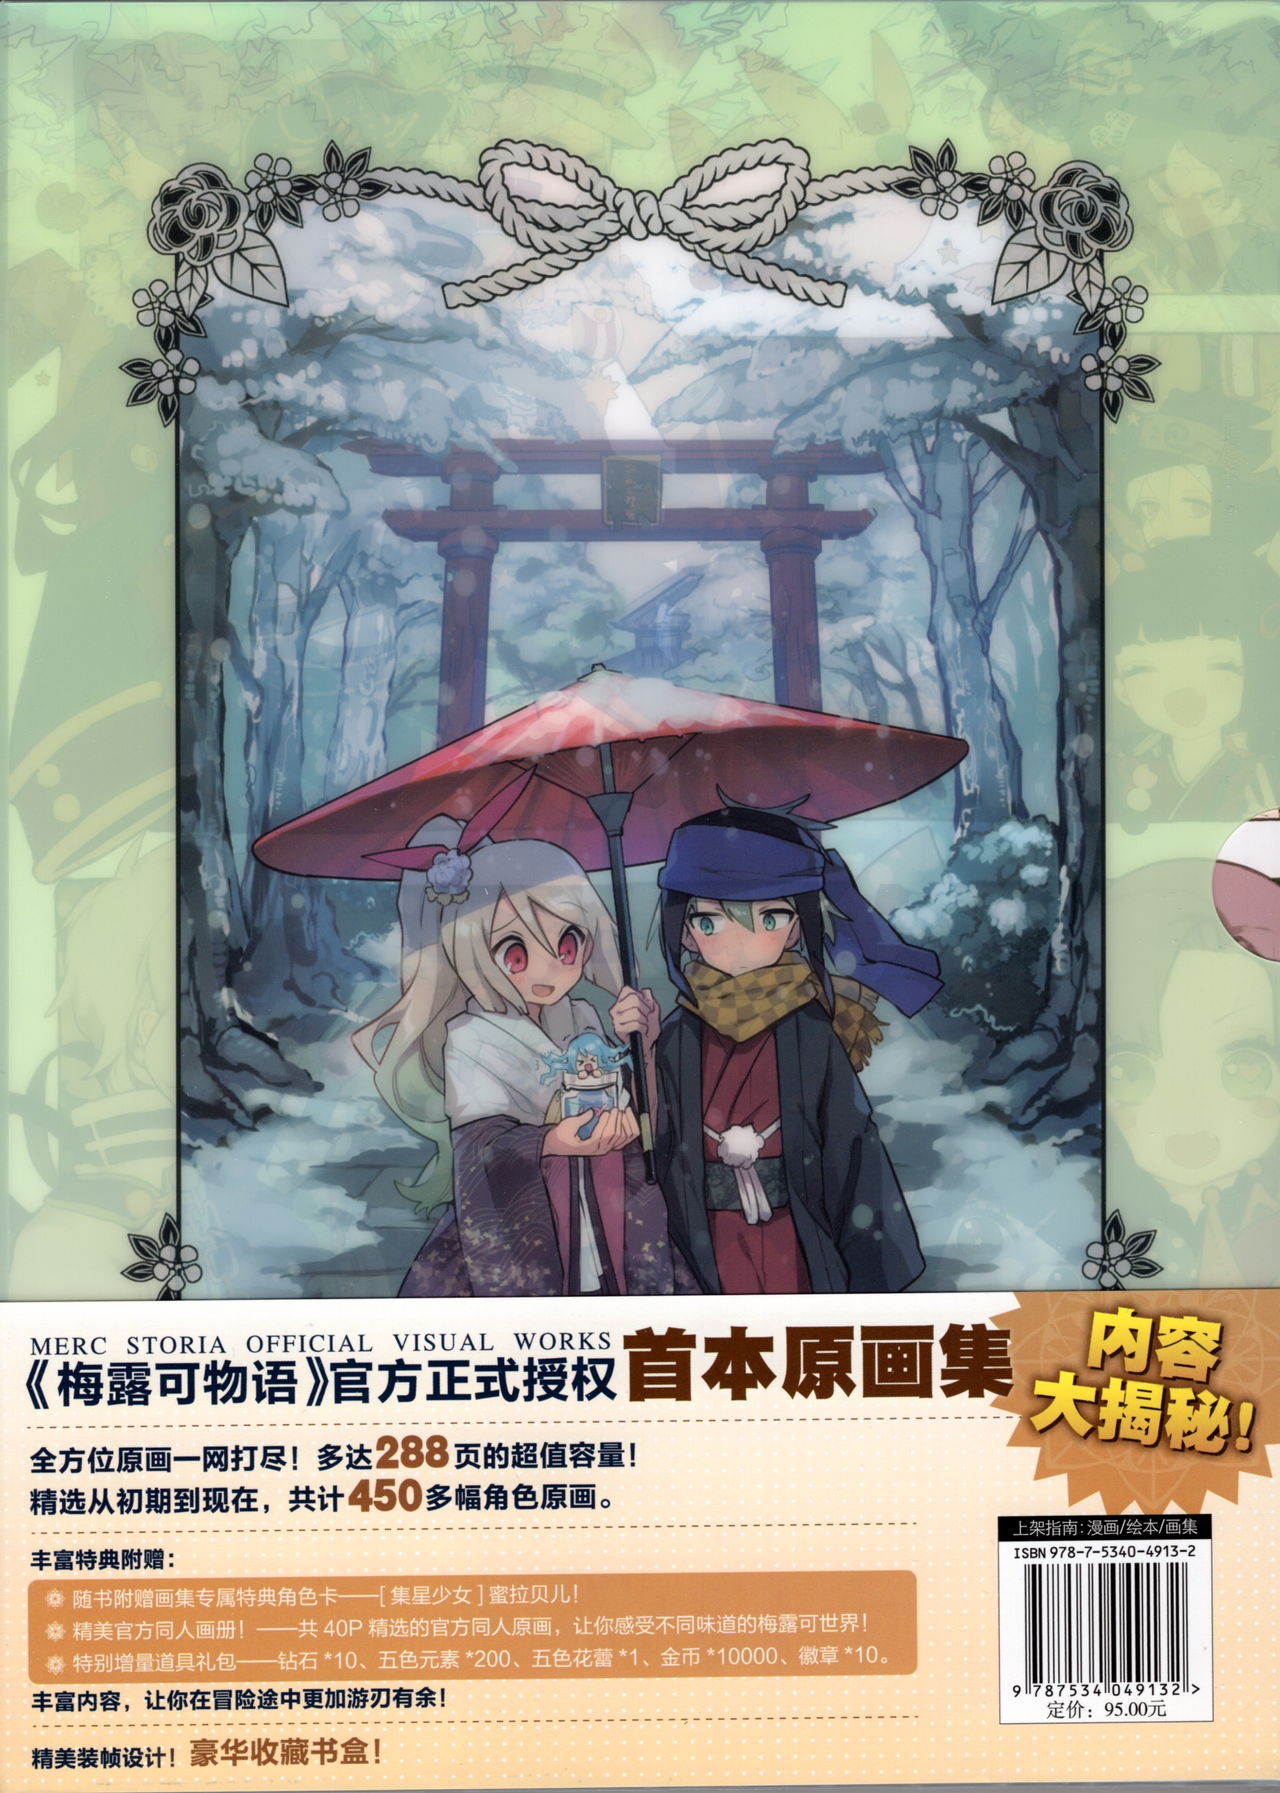 Merc Storia Official Visual Works [Chinese] 295